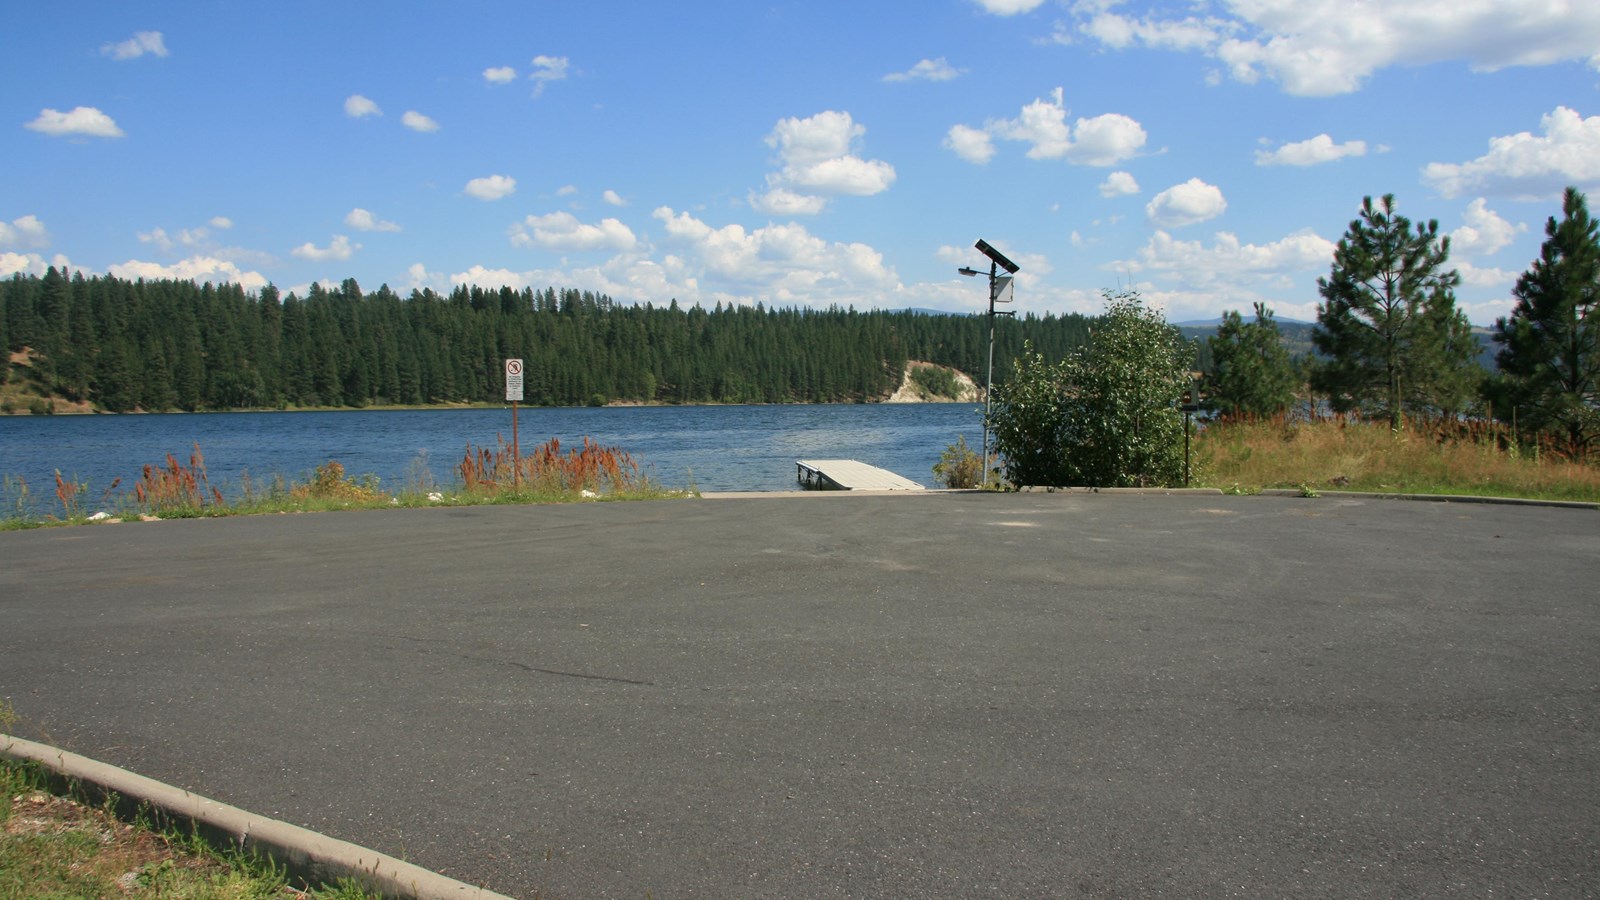 The paved boat launch and dock area at Snag Cove with the wooded shore beyond.